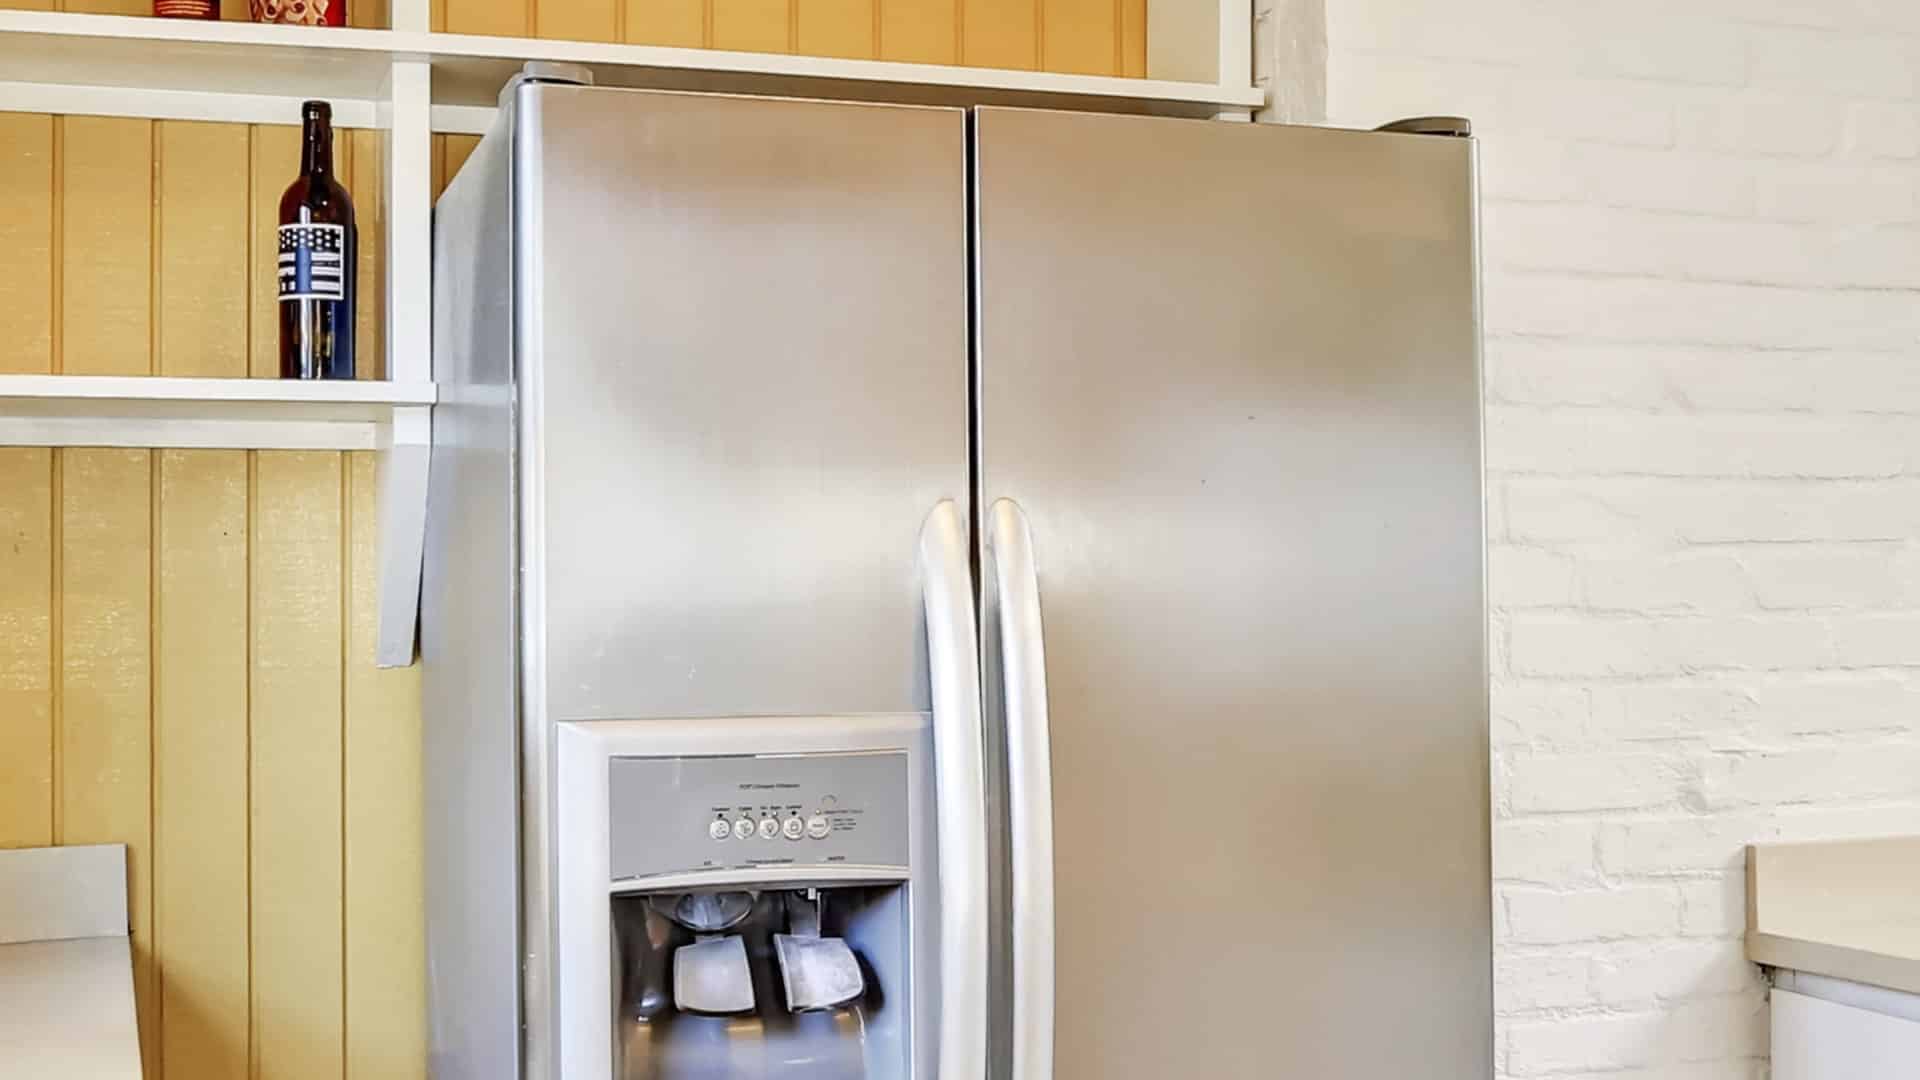 Featured image for “7 Reasons Why Your Refrigerator Is Making Noises”